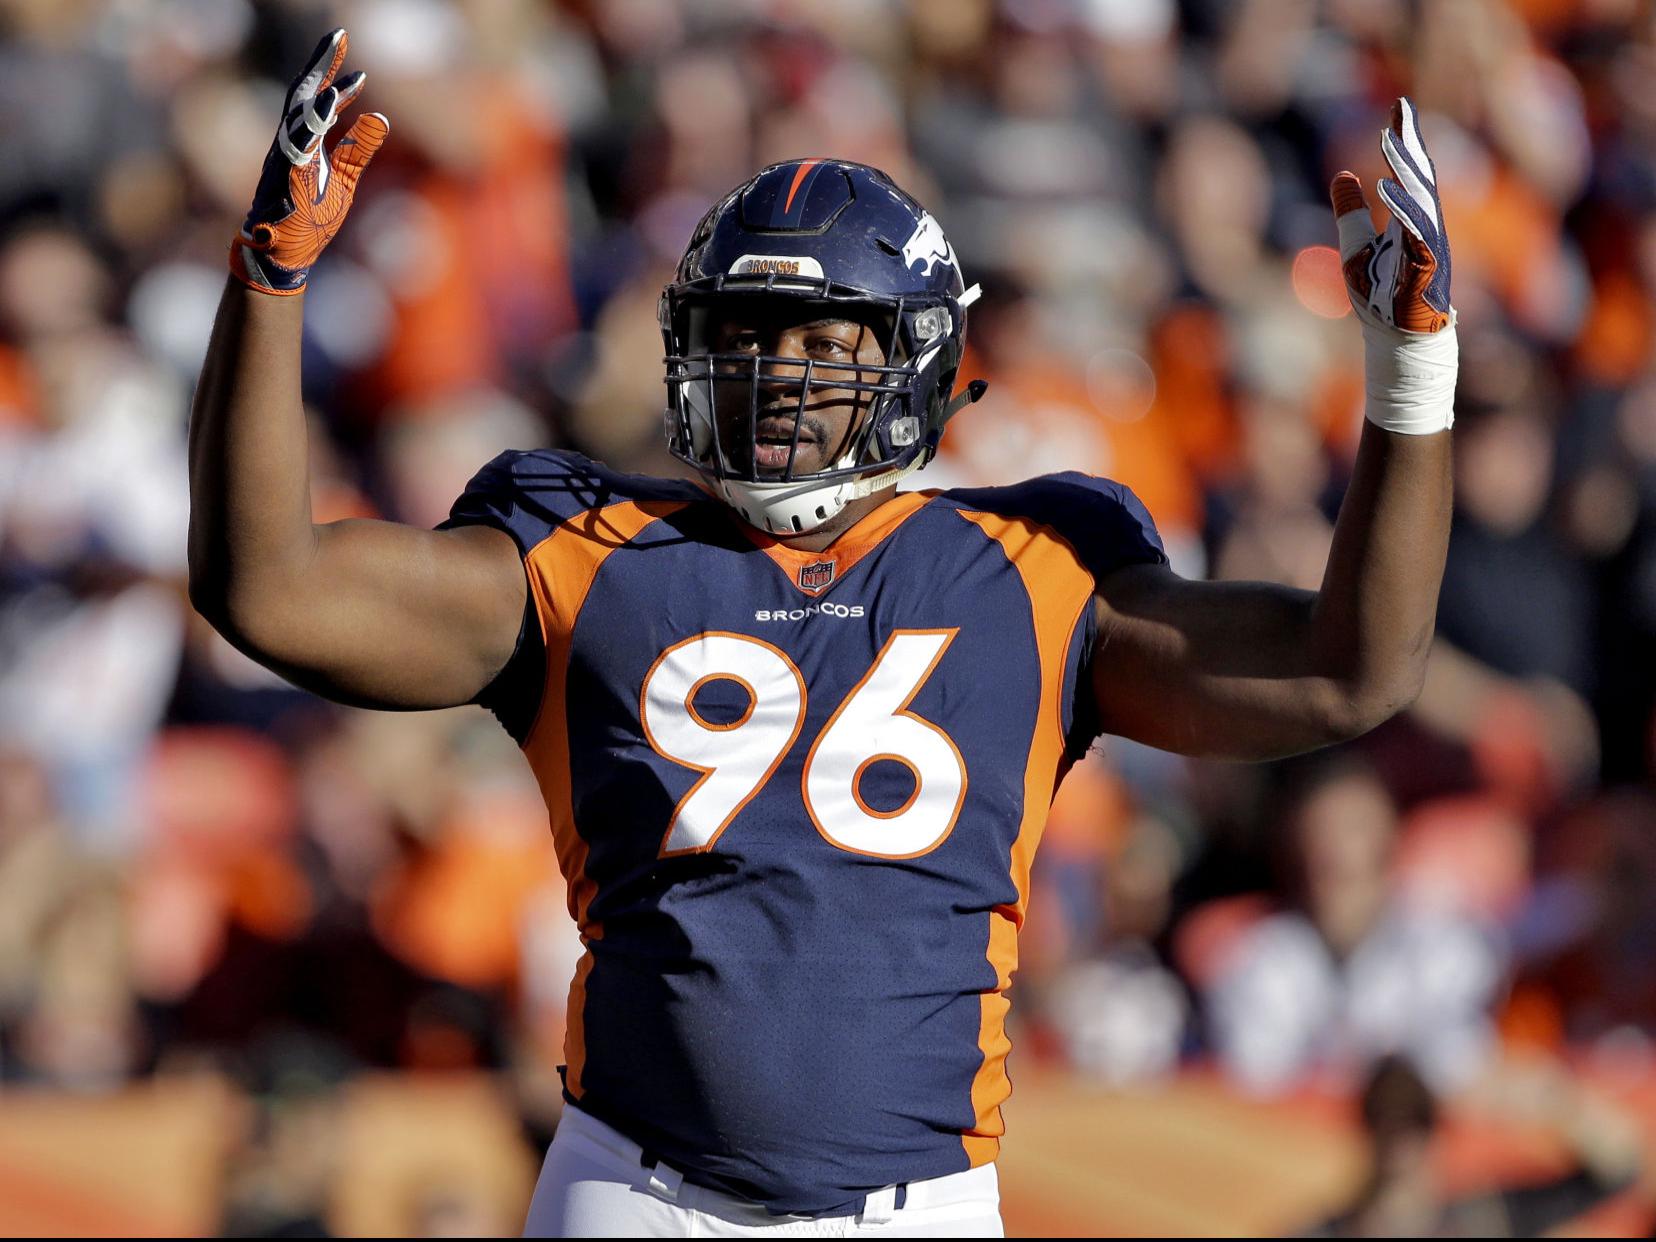 Woody Paige: Denver Broncos face Jags team that handed them worst